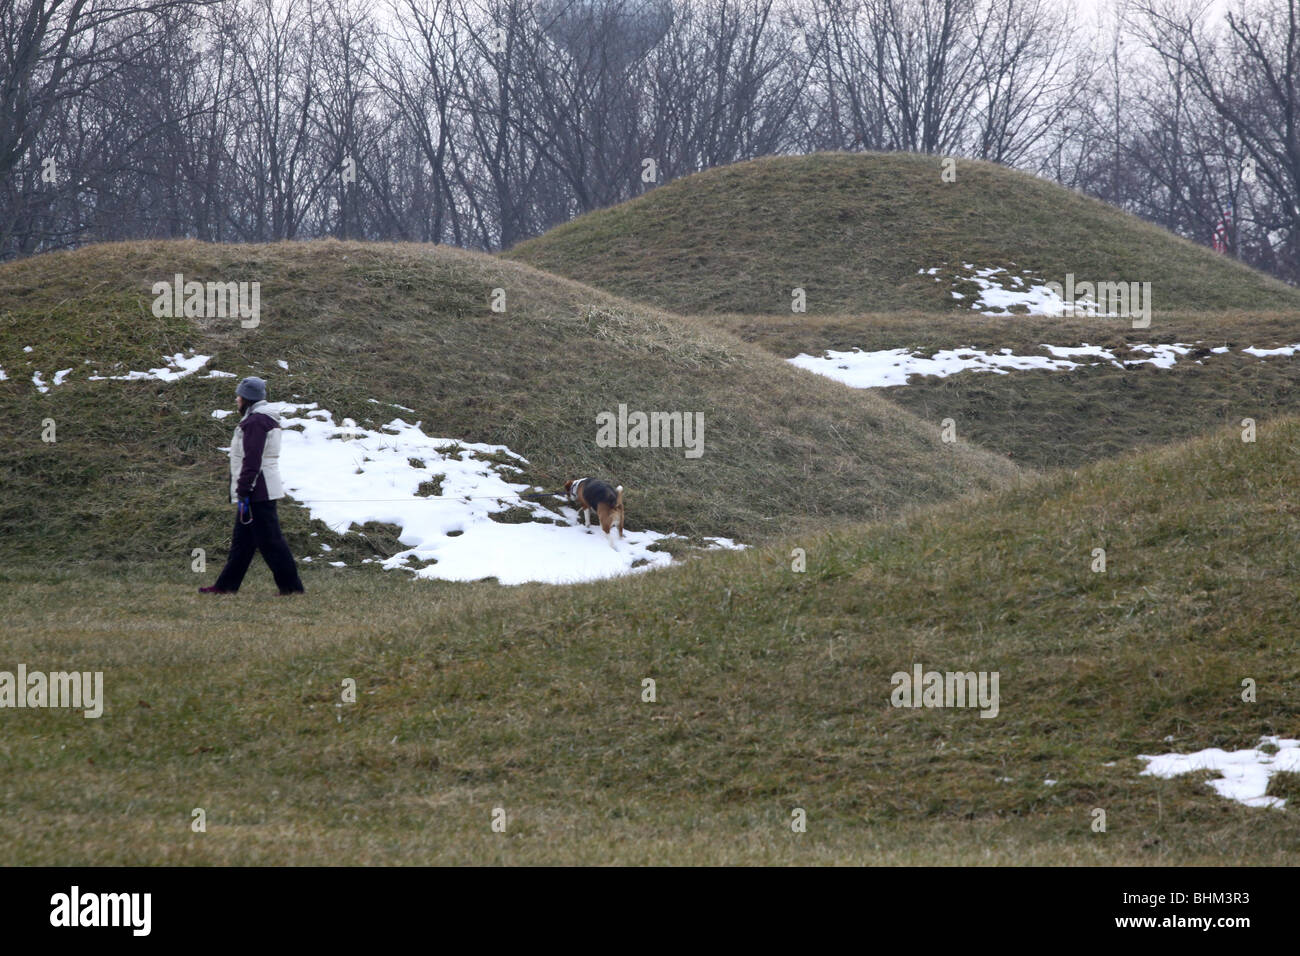 Hopewell Culture National Historical Park Indian Mounds earthworks Chillicothe Ohio Banque D'Images